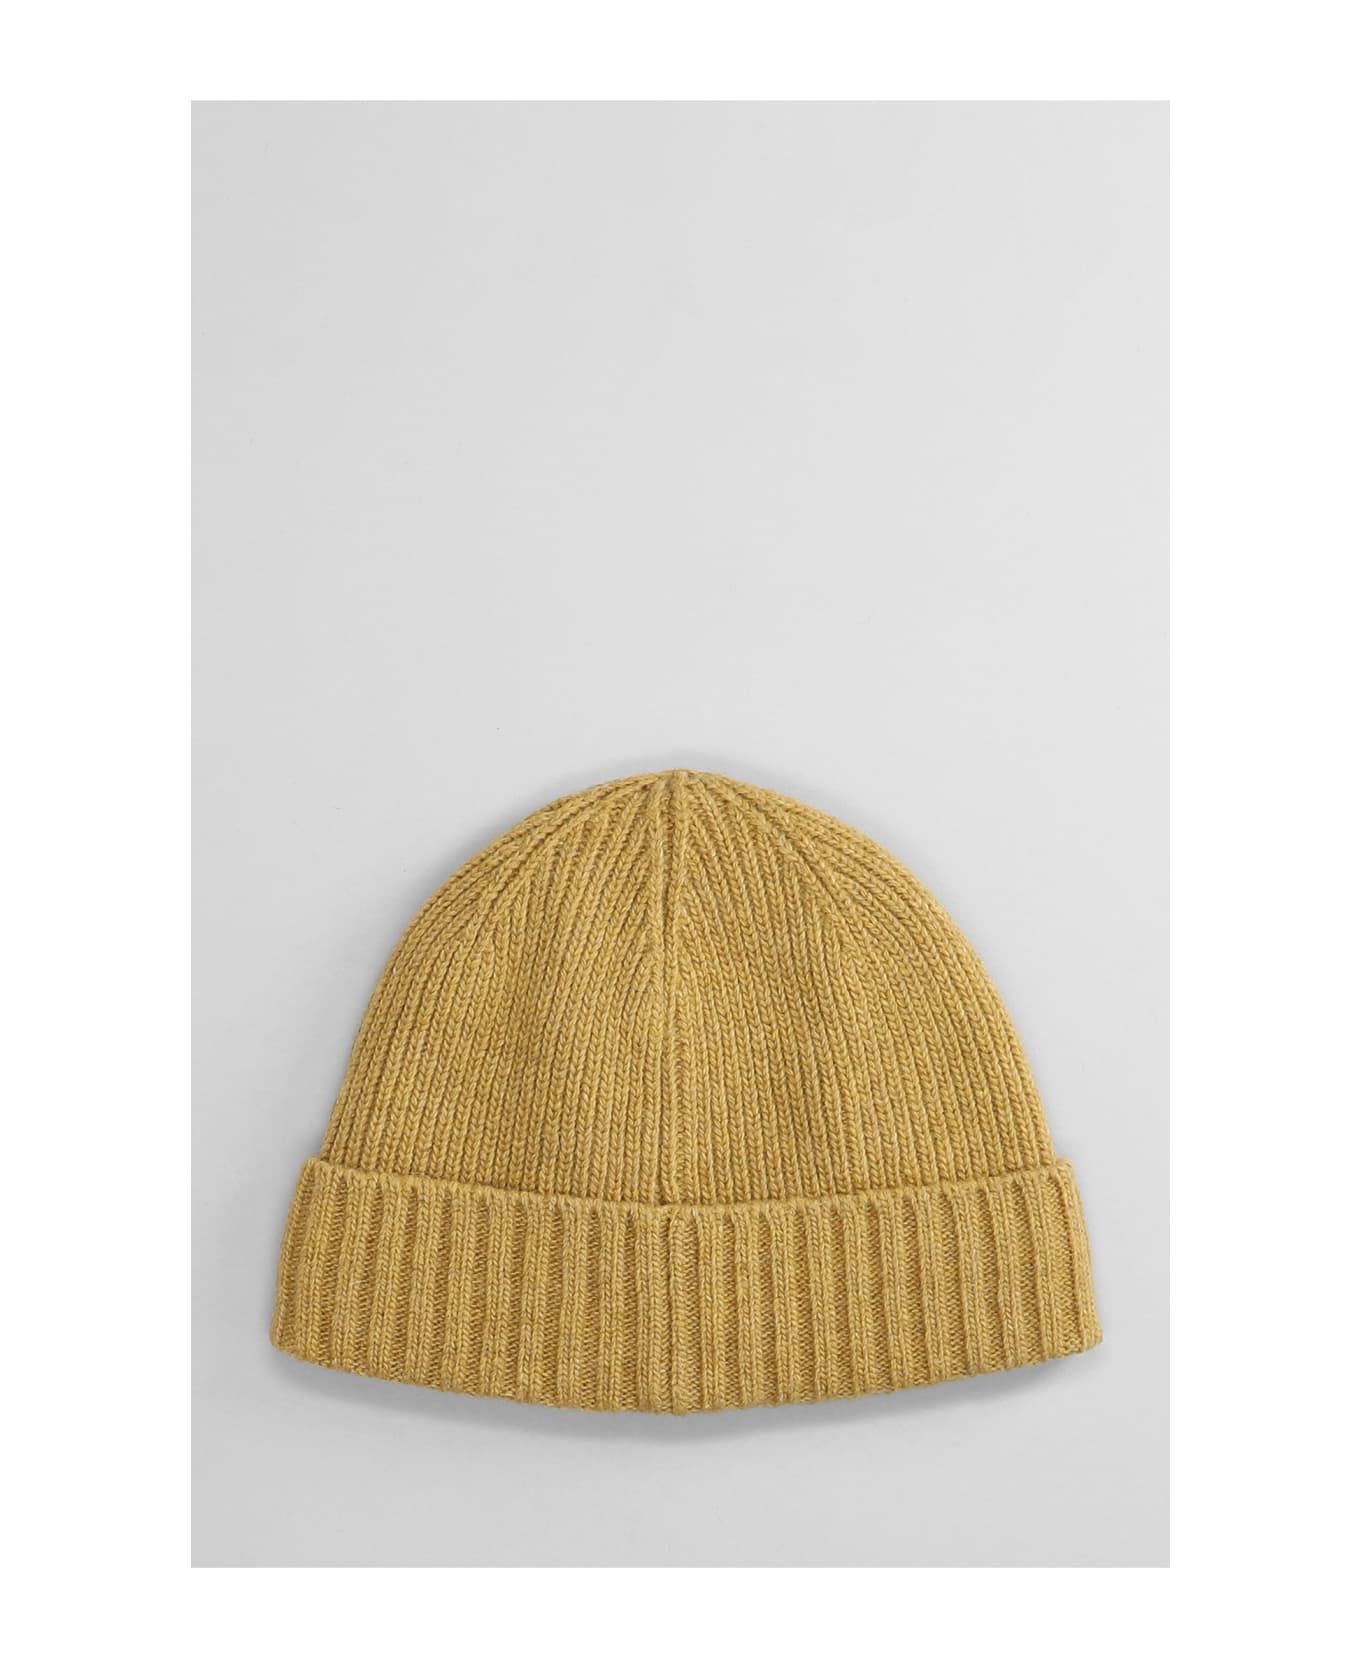 Barbour Carlton Beanie Hats In Yellow Wool - Harvest Gold